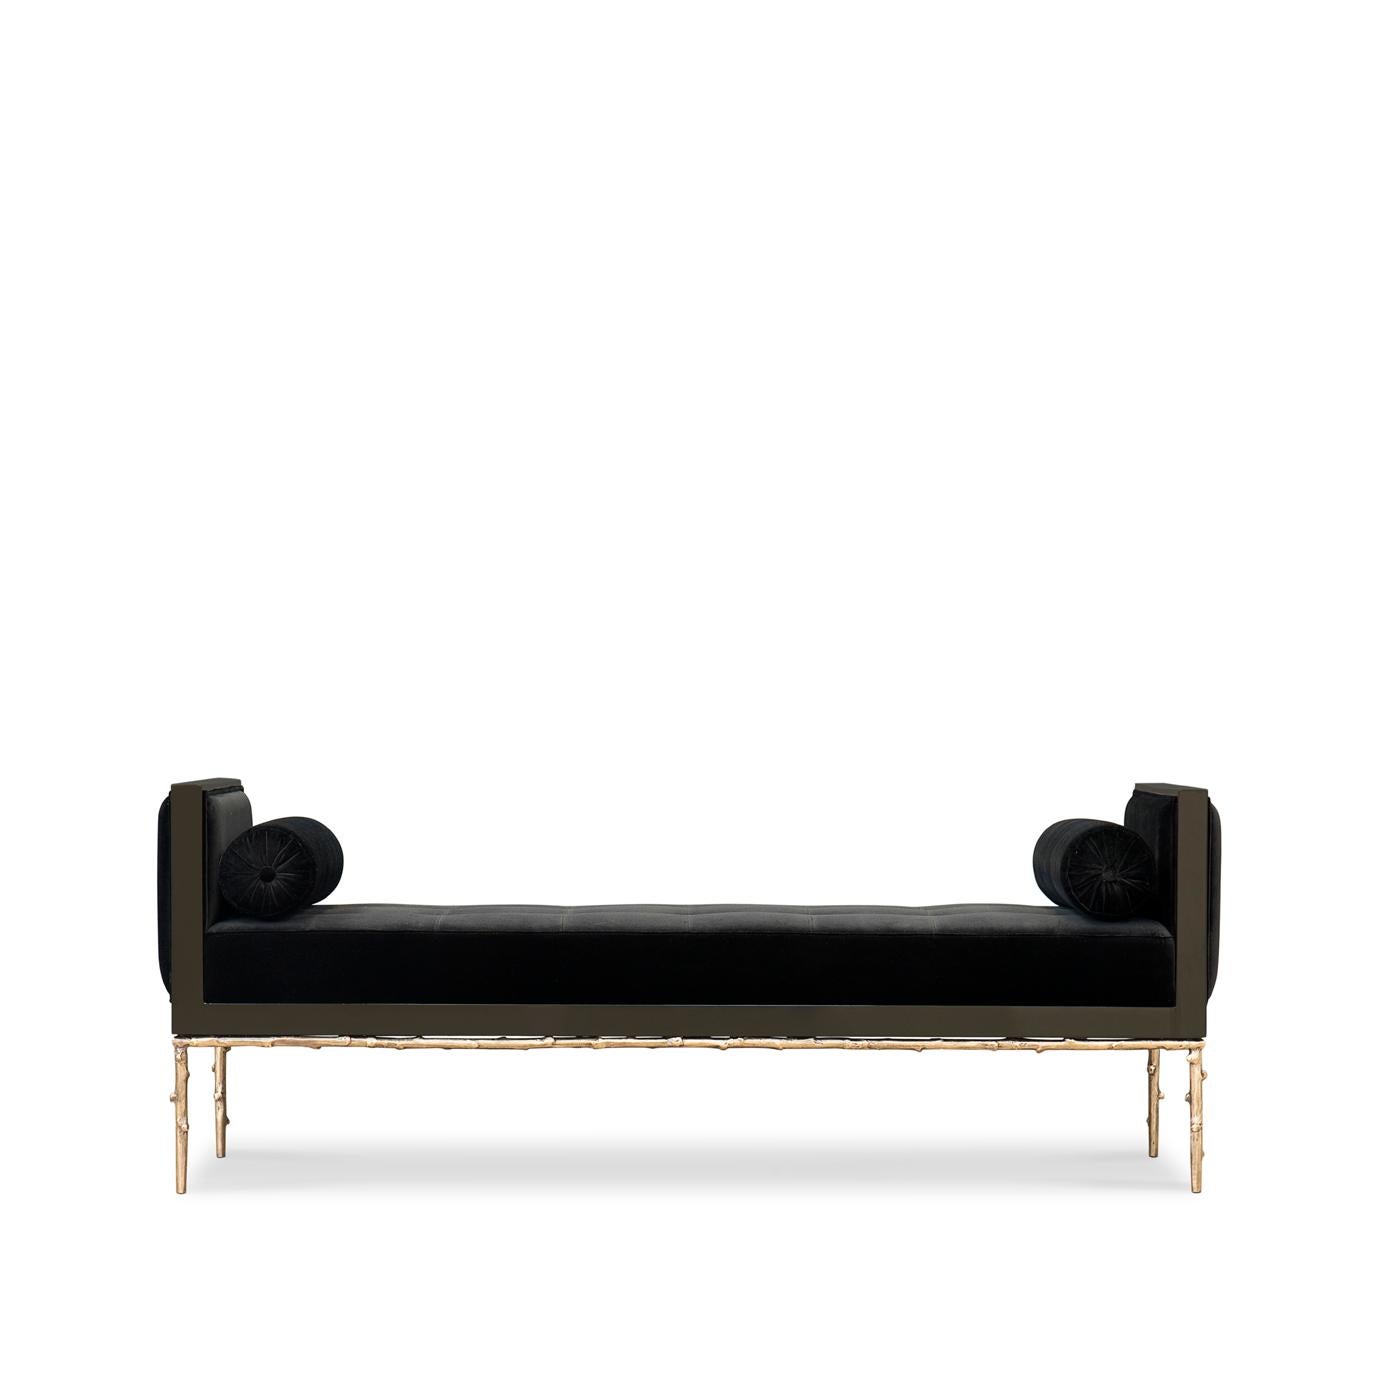 Not exactly flirtatious, but certainly not sweet, the Privê Daybed guarantees sensuous drama. Exquisite flora-inspired details adorn this seductive piece. A delicate branch-like base, stunning bronze & crystal jeweled bolsters, and sumptuous soft